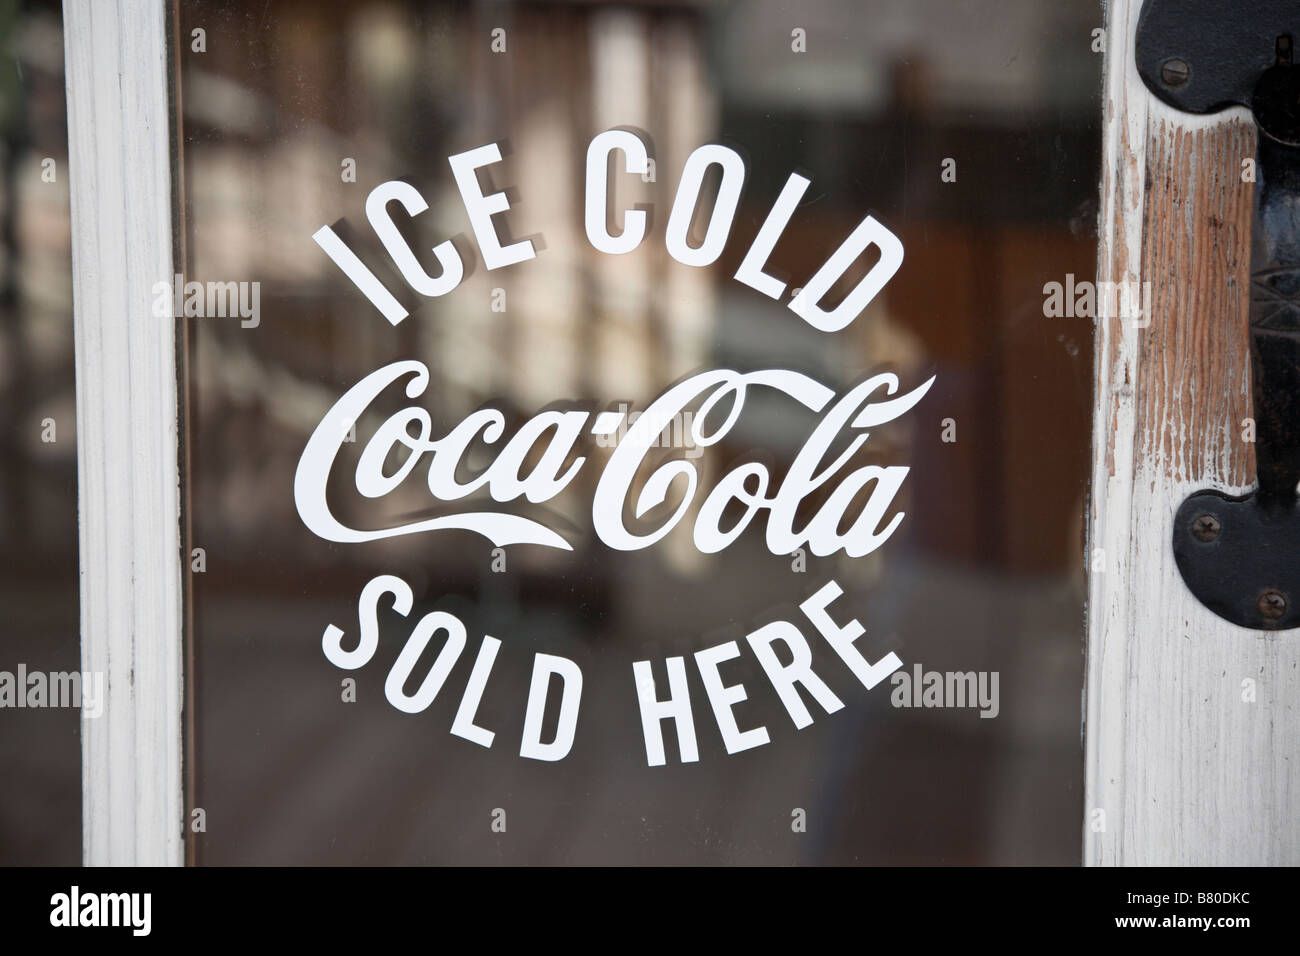 Ice Cold Coca-Cola Sold Here sign on old wooden door glass Stock Photo